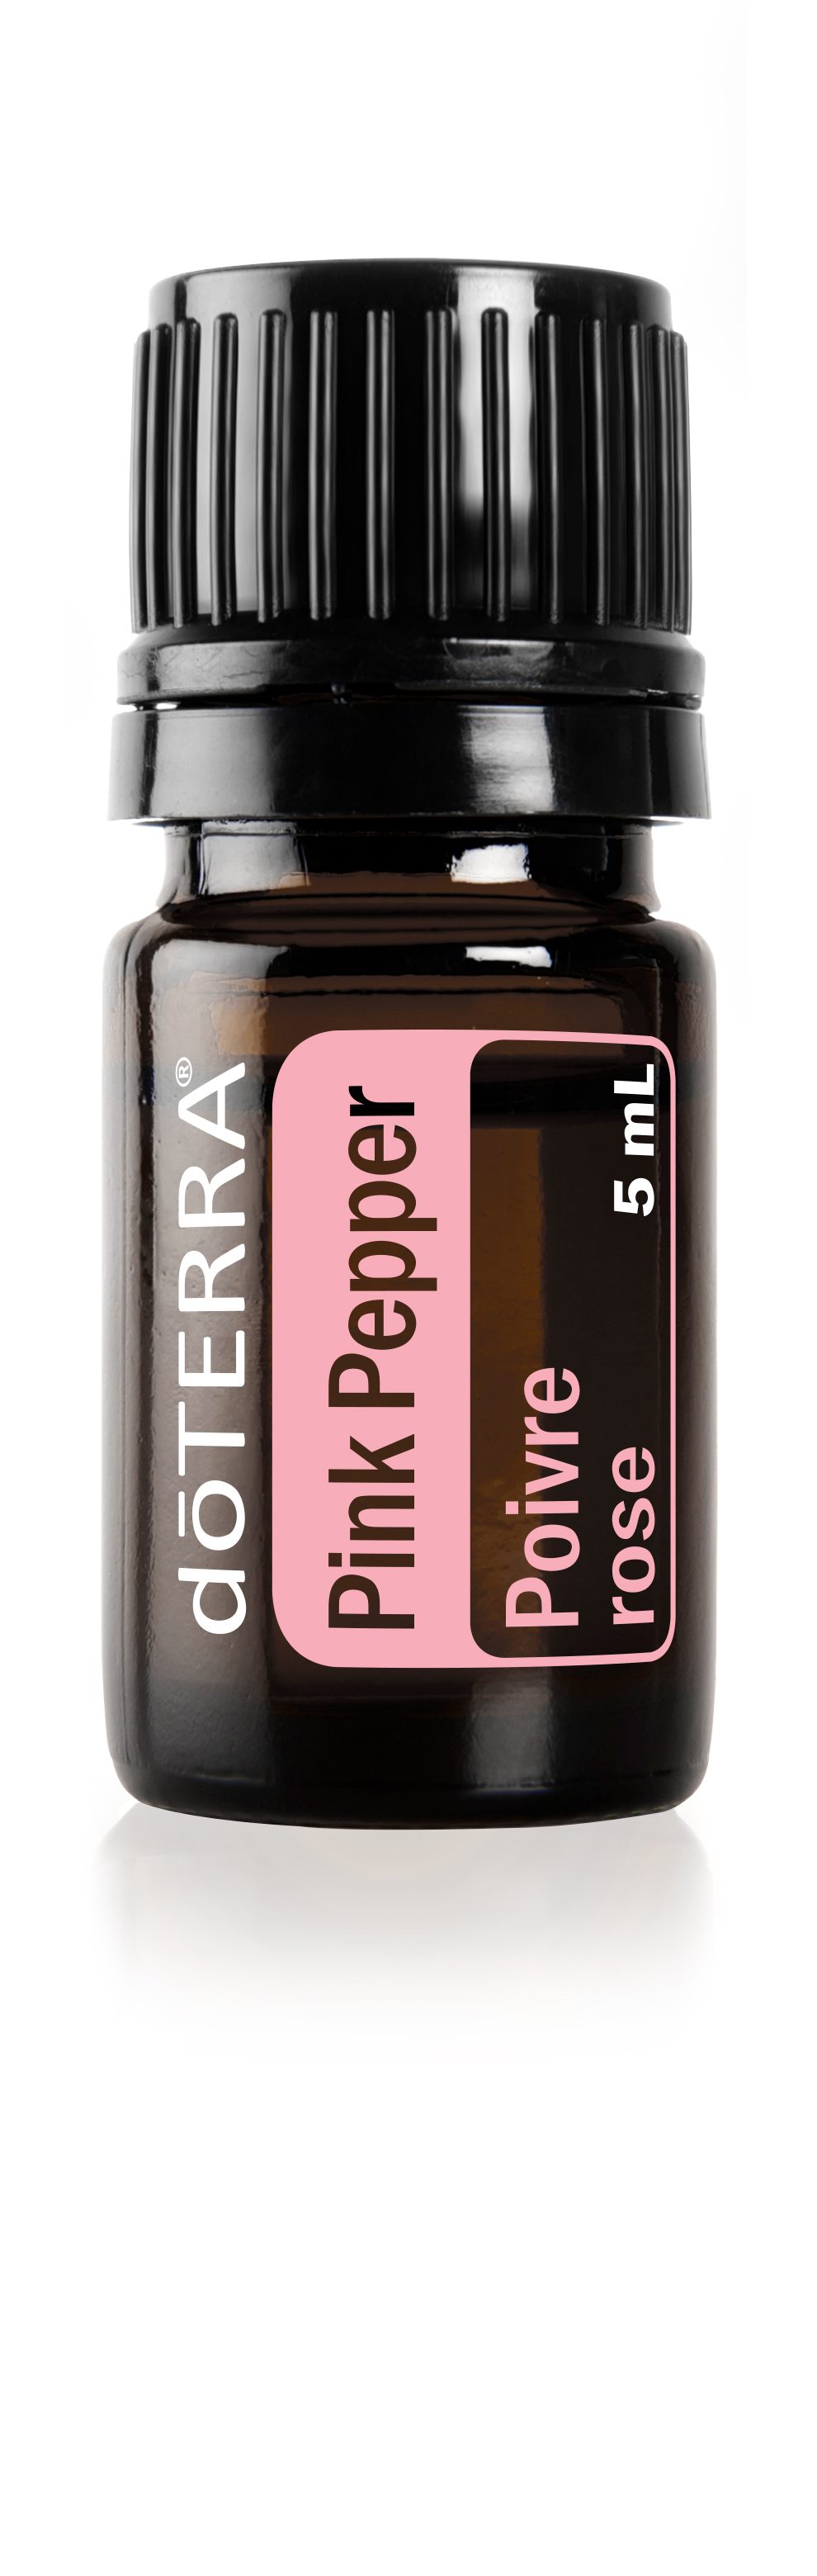 NEW doTERRA Pink Pepper 5ml Therapeutic Essential Oil Aromatherapy Free Post